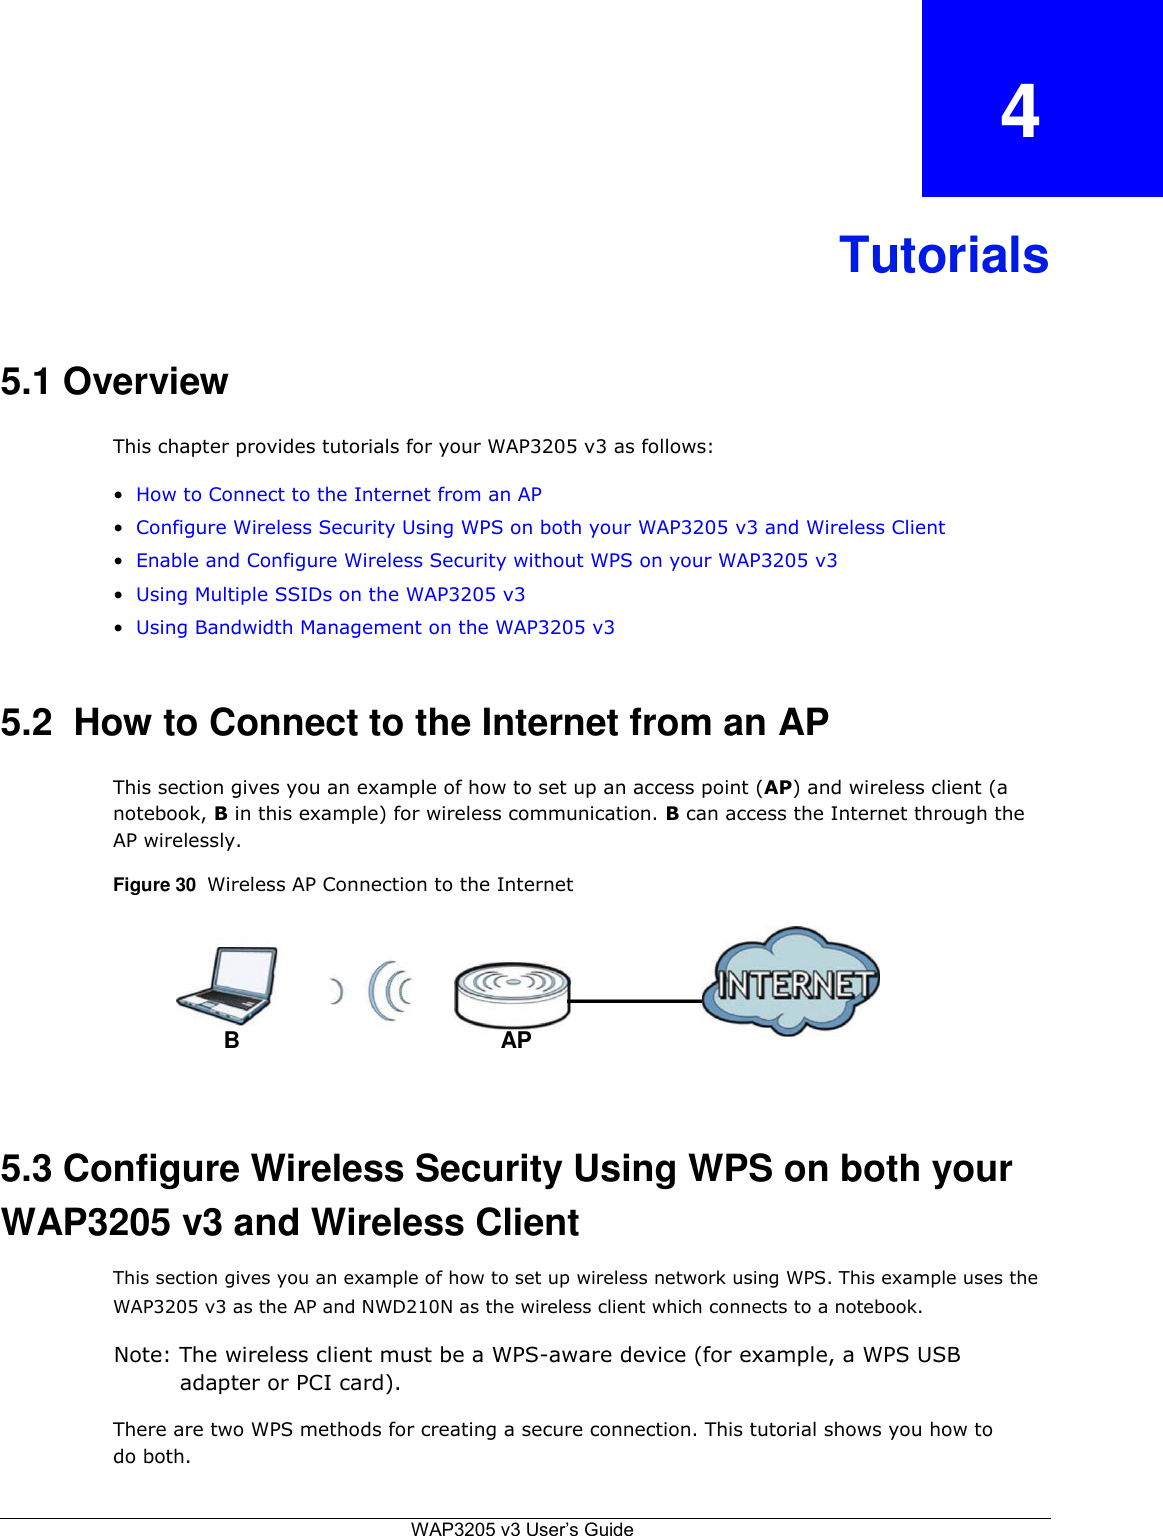 4    Tutorials    5.1 Overview  This chapter provides tutorials for your WAP3205 v3 as follows:  • How to Connect to the Internet from an AP  • Configure Wireless Security Using WPS on both your WAP3205 v3 and Wireless Client  • Enable and Configure Wireless Security without WPS on your WAP3205 v3  • Using Multiple SSIDs on the WAP3205 v3  • Using Bandwidth Management on the WAP3205 v3    5.2  How to Connect to the Internet from an AP  This section gives you an example of how to set up an access point (AP) and wireless client (a notebook, B in this example) for wireless communication. B can access the Internet through the AP wirelessly.  Figure 30  Wireless AP Connection to the Internet       B AP     5.3 Configure Wireless Security Using WPS on both your WAP3205 v3 and Wireless Client  This section gives you an example of how to set up wireless network using WPS. This example uses the WAP3205 v3 as the AP and NWD210N as the wireless client which connects to a notebook.  Note: The wireless client must be a WPS-aware device (for example, a WPS USB adapter or PCI card).  There are two WPS methods for creating a secure connection. This tutorial shows you how to do both.   WAP3205 v3 User’s Guide   